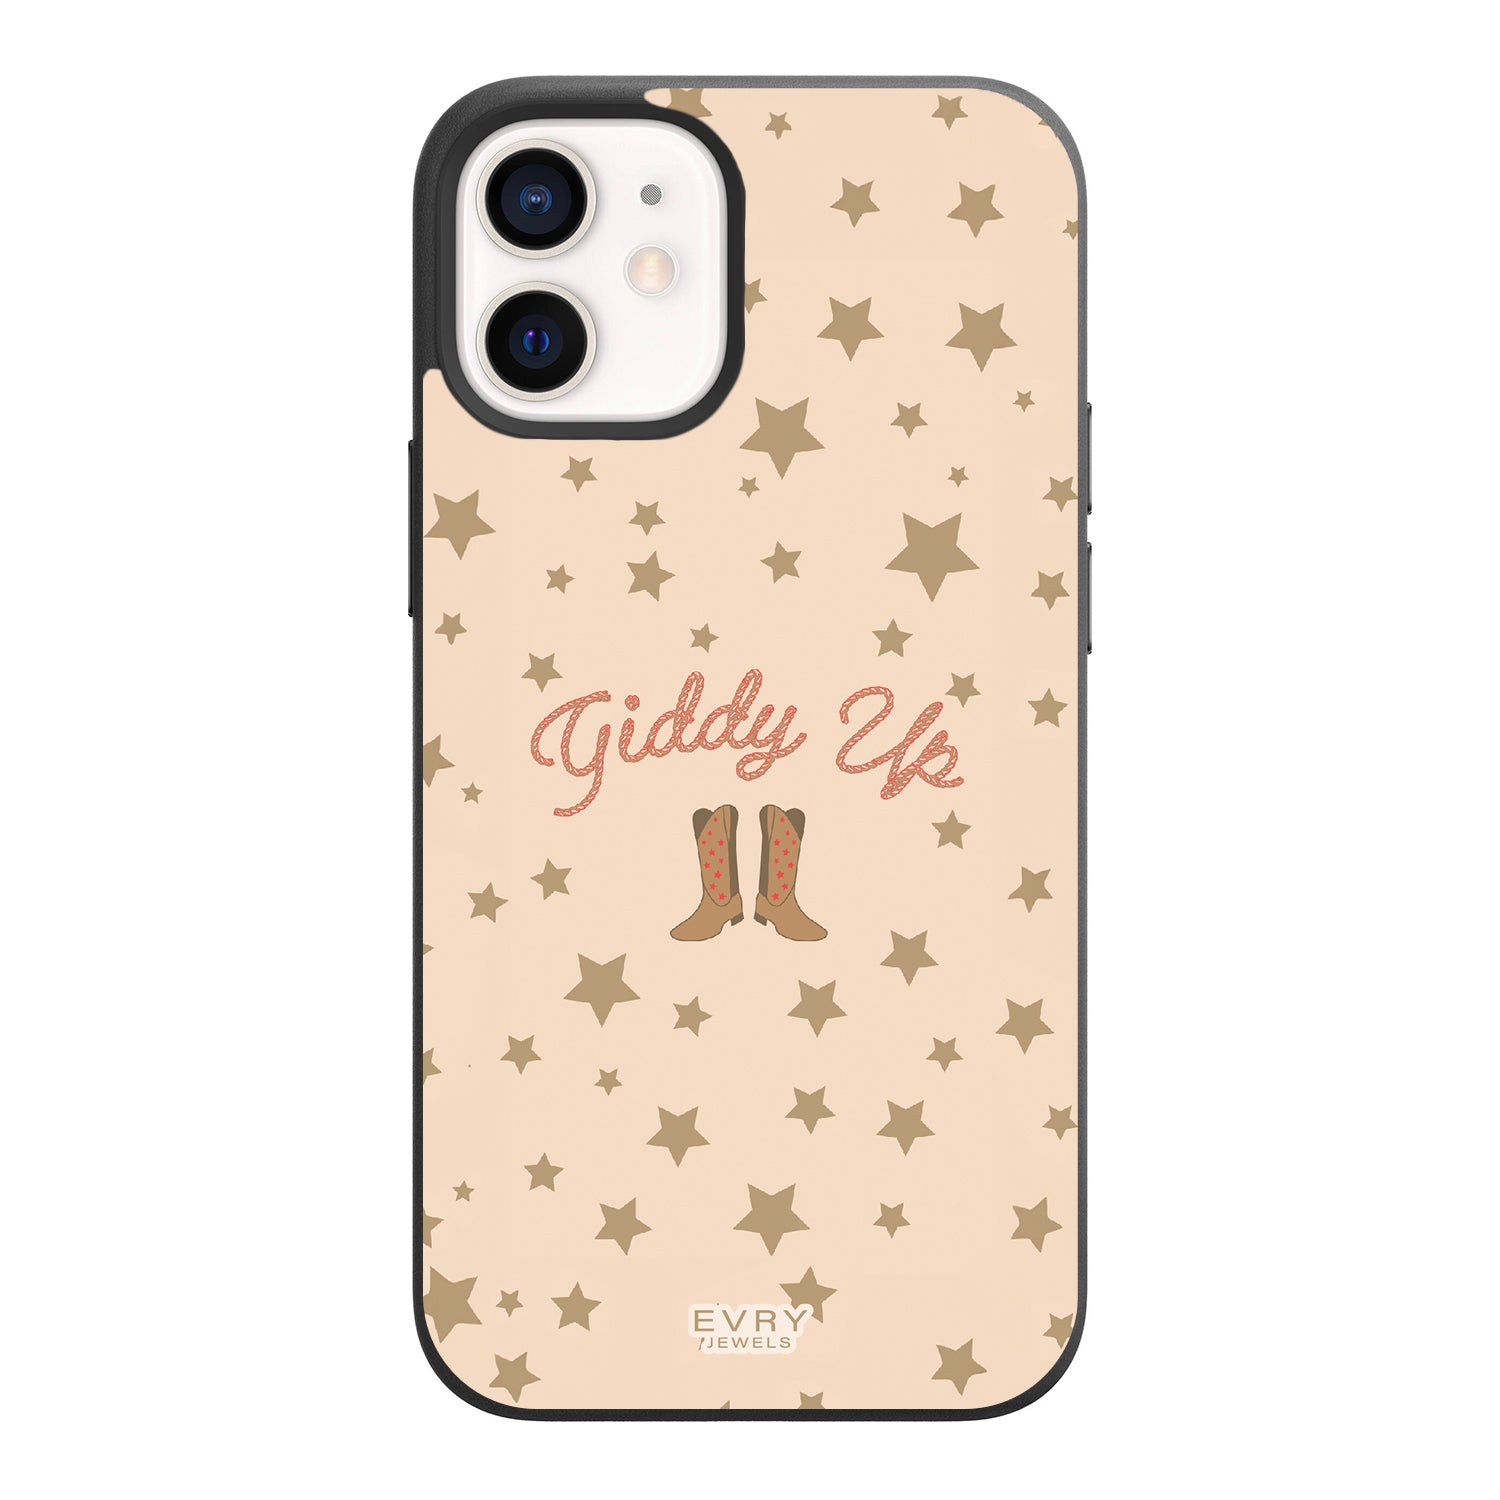 Giddy Up Phone Case